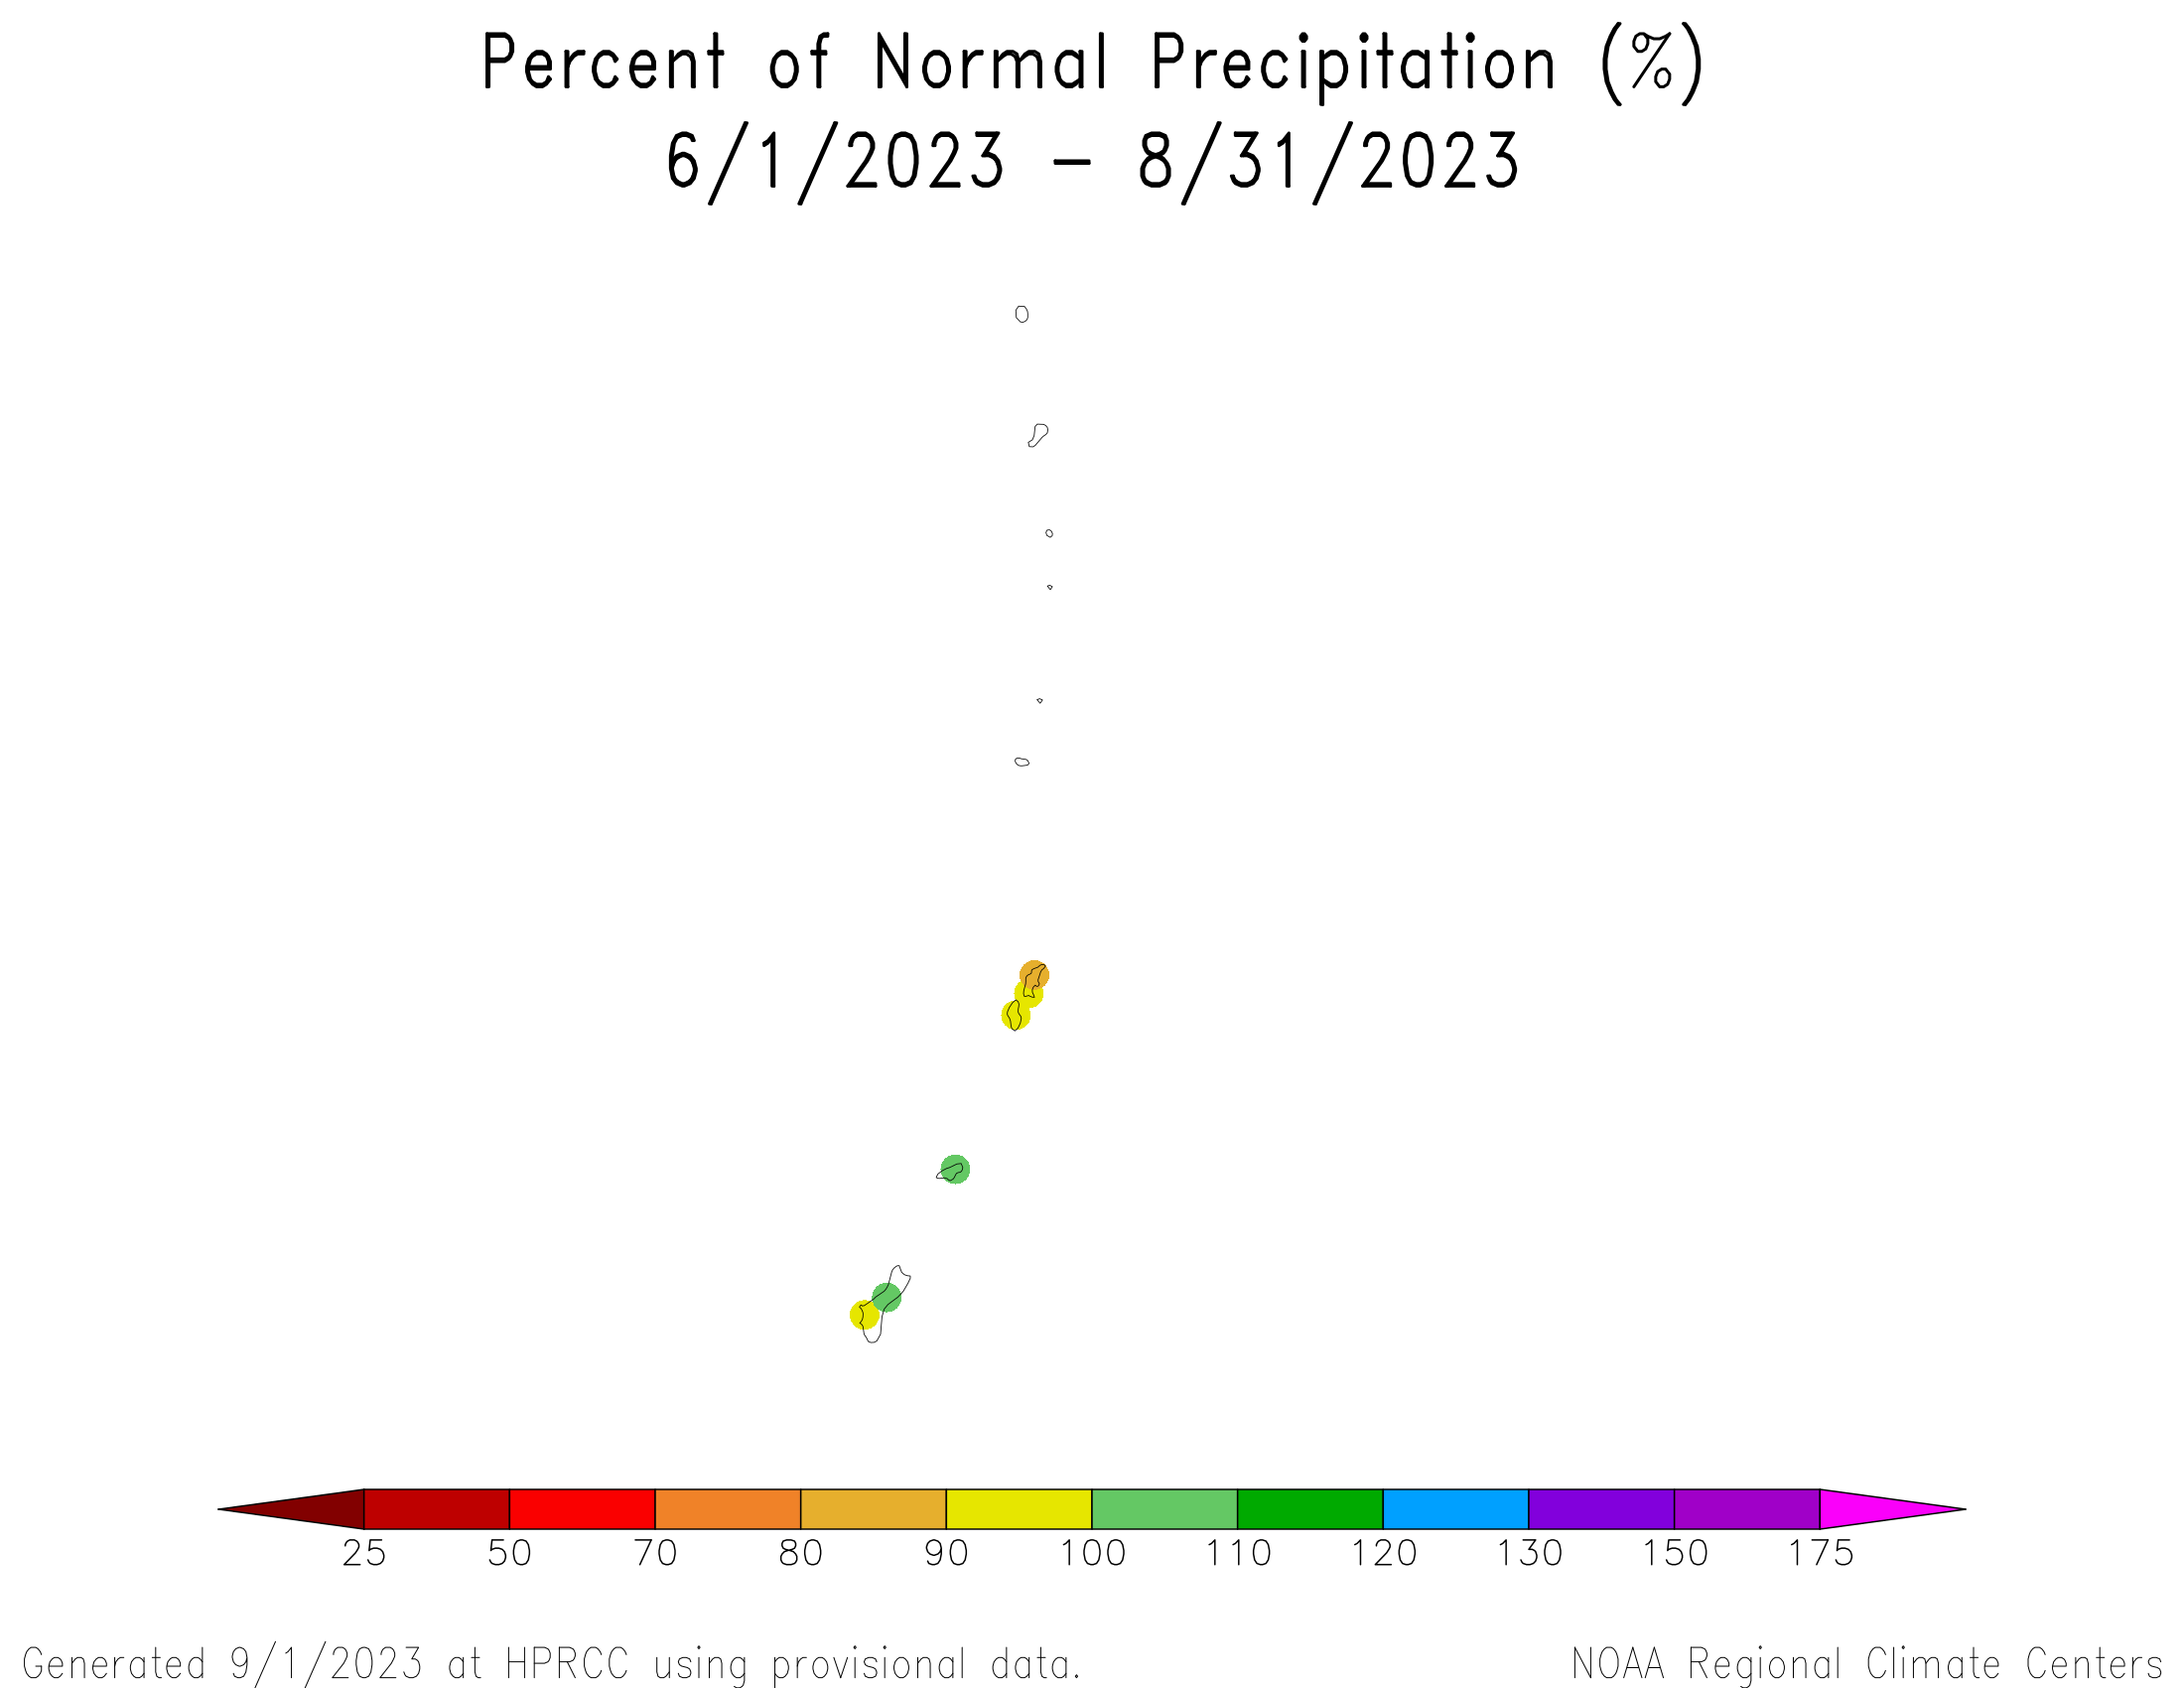 June-August 2023 Percent of Normal Precipitation for the Marianas